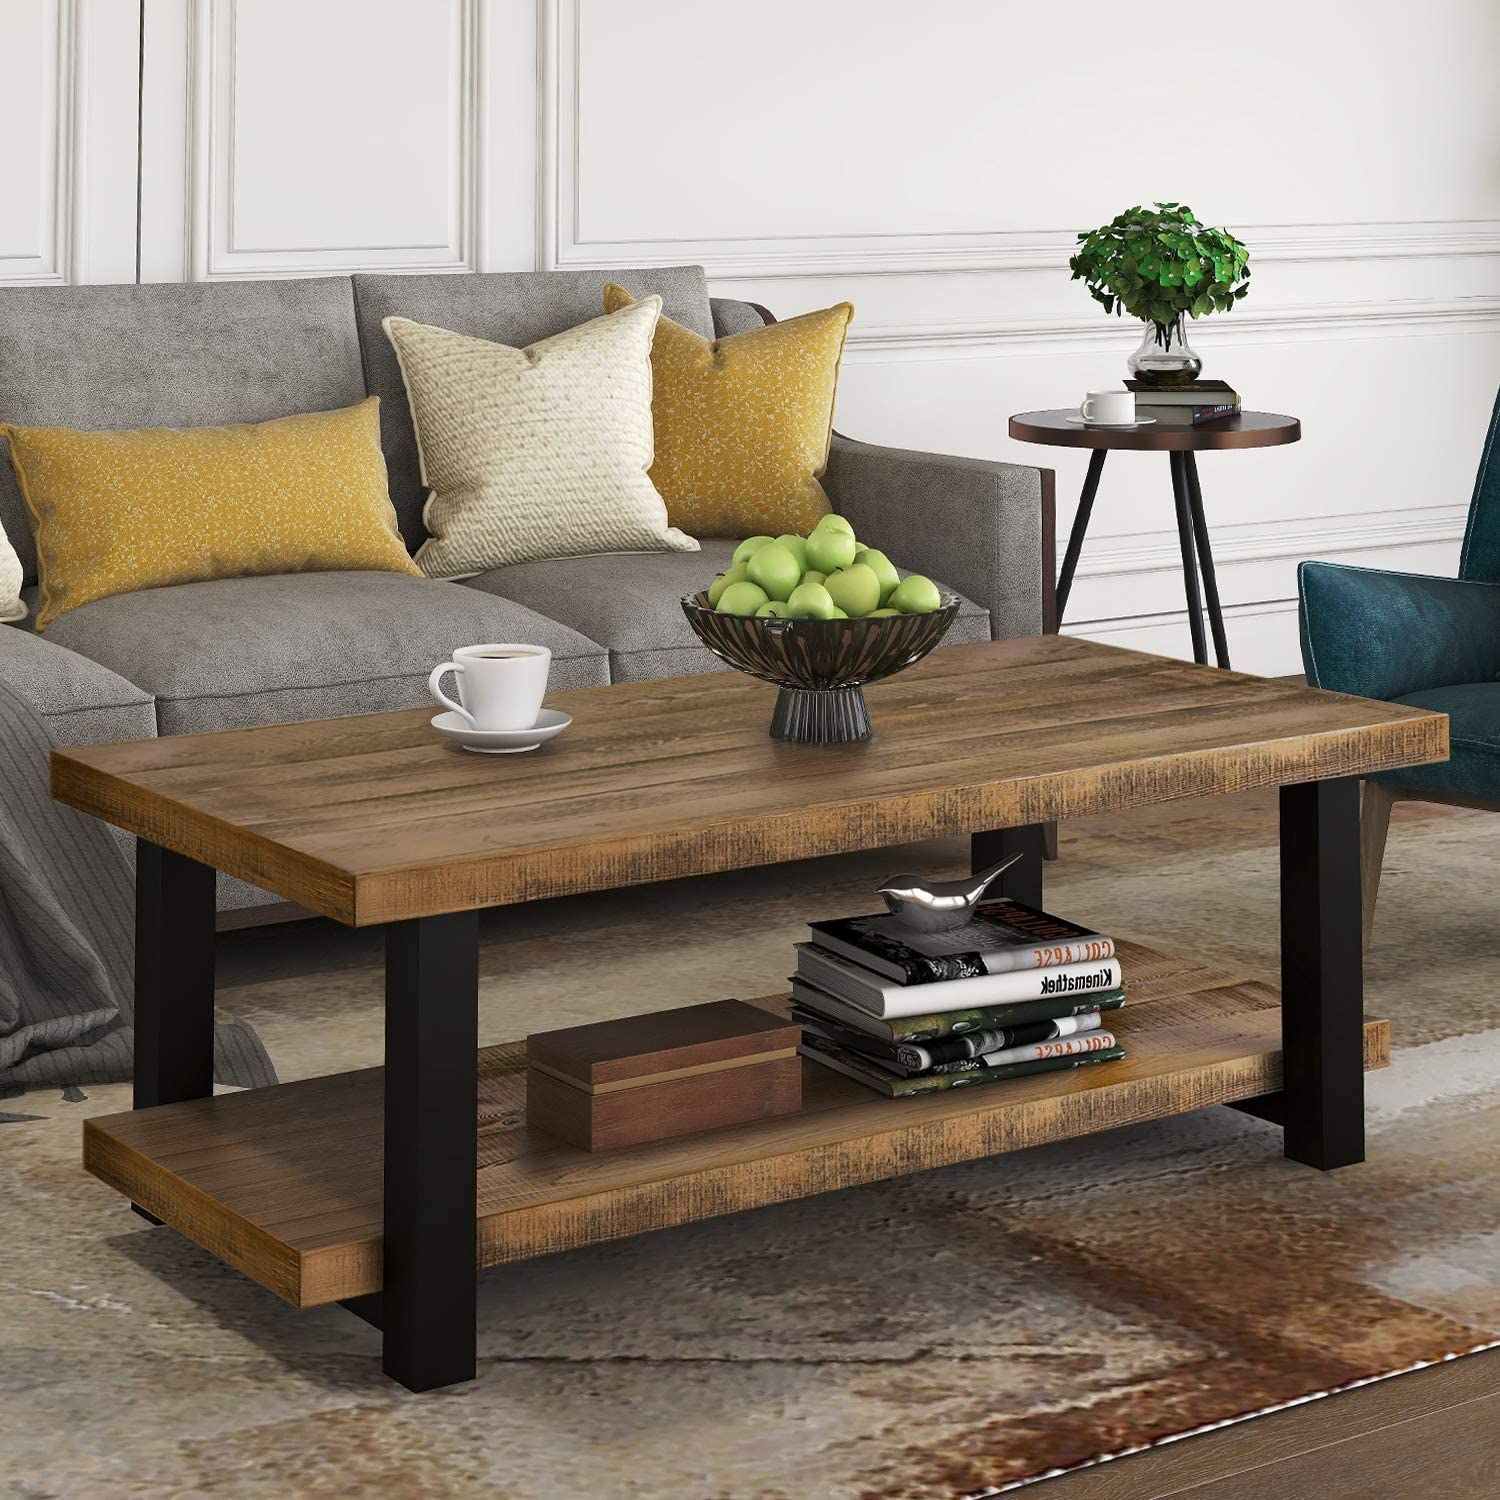 Choose The Perfect Style Coffee Table To Compliment Your Home – Coffee In Waterproof Coffee Tables (View 15 of 21)